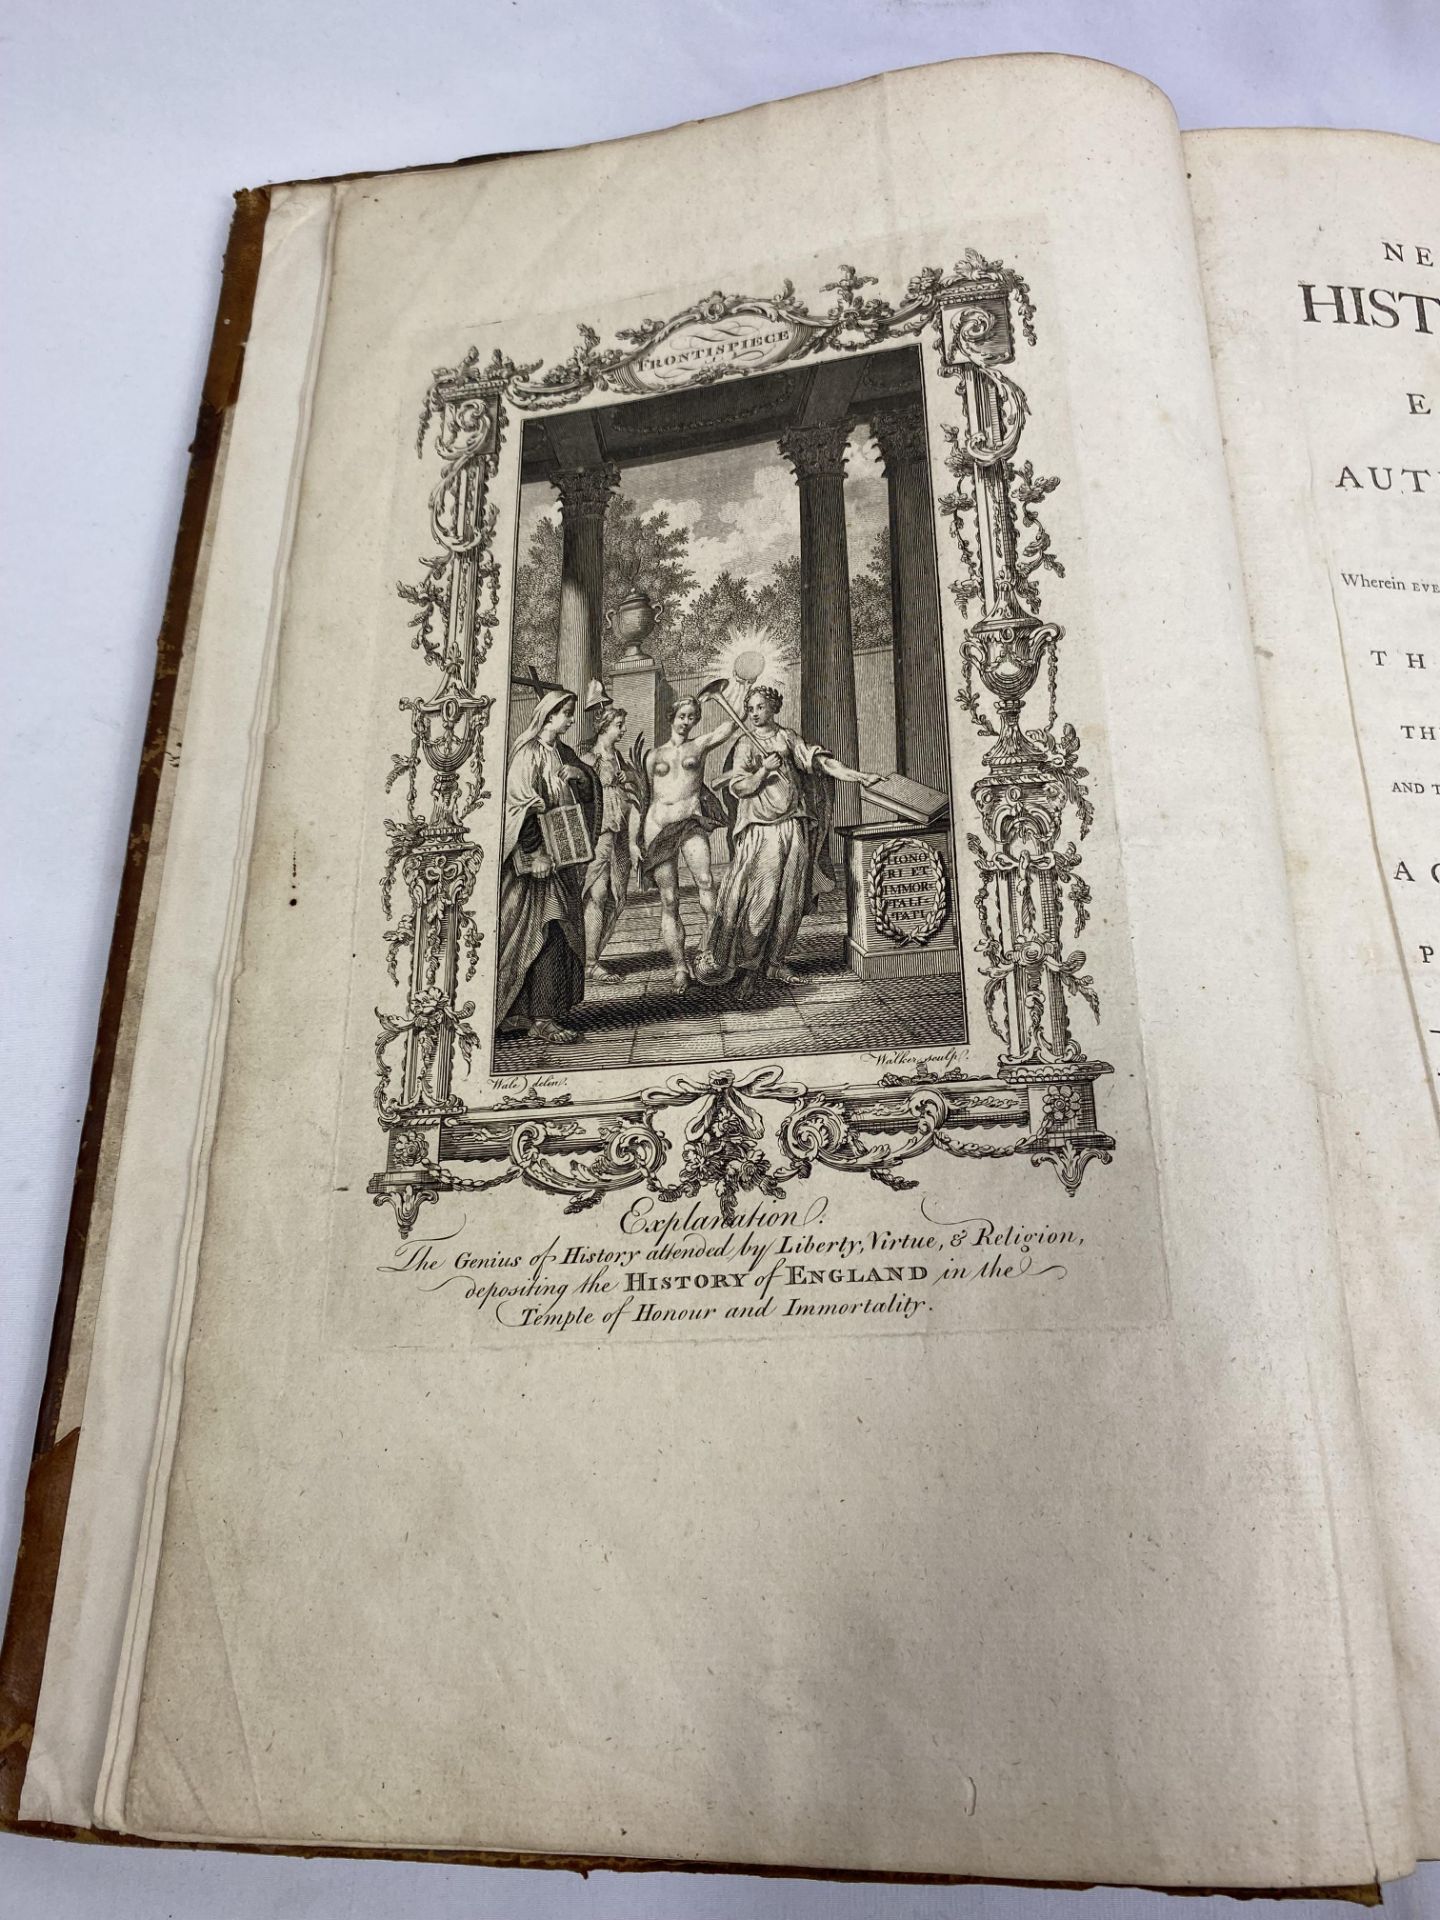 A New and Complete History of England by Temple Sydney, printed for J. Cooke 1773 - Image 2 of 6